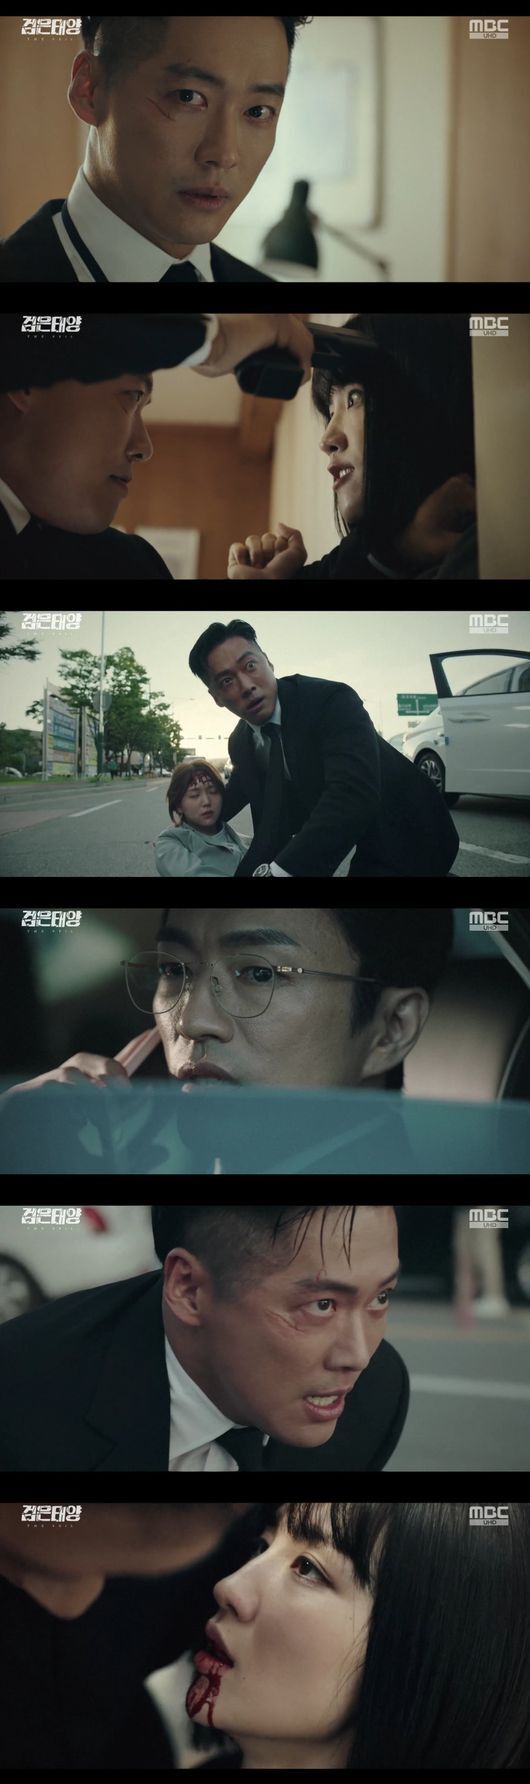 The Black Sun once again shocked the house theater with an unexpected reversal.The fact that Namgoong Min has been suffering from dissociative memory impairments all the time due to his parents death in his childhood, and the police evidence that the person who shot Park Ha-sun was Namgoong Min,In the 5th episode of MBCs 60th anniversary special project, Black Sun (director Kim Sung-yong / playwright Park Seok-ho), which aired at 9:50 pm on the 1st (Yesterday), Namgoong Min (played by Han Ji-hyuk), who became suspicious of Park Ha-sun (played by Seo Soo-yeon) as an insider of the NIS who dropped himself and his colleagues a year ago, He was pictured leaving.According to Nielsen Korea, a ratings agency on the 2nd (Today), the Black Sun, which was broadcast the previous day, continued its pleasant momentum with 9.8% of Seoul Capital Area households.In particular, the scene in which Kim Ji Eun (Jay Yoo) is convinced of the existence of NIS black agent Jung Moon-sung (Jang Chun-woo Jun), who has been watching Namgoong Min, soared to 11.1% of the moments audience rating, adding to the viewers curiosity about Jung Moon-sung, who called Namgoong Min a brother.In addition, the 2049 ratings (based on Seoul Capital Area), a key indicator of advertisers major indicators and channel competitiveness, also rose to 4.0%.Previously, Han Ji-hyuk (Namgoong Min) found out that Choi, who was tracking the last emergency contact in Dandong at his request a year ago, was killed in question and that the inside person who received the emergency contact was no different from Seo Soo-yeon (Park Ha-sun).Seo Soo-yeon, who has been resenting Han Ji-hyuk for the sadness and anger of losing his fiance, revealed that there was a meaningful secret and confused the house theater once again.On the broadcast yesterday, Han Ji-hyuk lost his mind and lost his mind.He woke up again and decided to dig behind her rather than ask Seo Soo-yeon the truth directly, and then he had some clues in his hand.Seo Soo-yeon had a person who had been dating before meeting his fiance Oh Kyung-seok (Hwang Hee-hee), who died a year ago, and that she was secretly taking painkillers and sedatives through a relative who was a psychiatrist to avoid leaving a hospital record.Attention has been focused on Seo Soo-yeons suspicious move, which has emerged as a strong internal traitor candidate.Sure enough, black agent Jang Chun-woo (Jeong Mun-sung) appeared and suggested that the development of the drama would be another phase.With his appearance, he threatened Jung Eun-hee (Park Ji-yeon), a cousin of Jung Gi-seon, and even made viewers more nervous by creating eerieness that forced them to die on their own.He also doubled suspicions that he had done the same project with Seo Soo-yeon six years ago and four years ago at the NIS.Jang Chun-woo, who suddenly appeared, reached out to Han Ji-hyuk and Jay Yooo.Jay Yooo was attacked by someone in the underground parking lot, and Han Ji-hyuk immediately ran to her place after receiving a call from Jang Chun-woo.Han Ji-hyuk began to chase after a suspicious vehicle fleeing the scene, and the breathtaking chase on the road soon captured the eyes and ears of viewers by creating another Legend spy action god.In addition, Jay Yooo, who passed out in blood in a vehicle driven by Han Ji-hyuk, was found, and for the purpose, he felt the aspect of a god who hurt many colleagues by bumping into each other.At the end of the 5th broadcast, CCTV evidence of the police that the shooter who shot Seo Soo-yeon was Han Ji-hyuk was drawn and the house theater was intensely painted.Han Ji-hyuk met with Seo Soo-yeon and talked with him as a long-time colleague, and Seo Soo-yeon, who was trying to say something, fell down with bloodshed with an unexpected shooting.Han Ji-hyuk, who rushed her to the hospital, responded to a police investigation and asked her to release CCTV, but a shocking reversal was revealed here.CCTV contains a scene where Han Ji-hyuk takes out a gun with a silencer and shoots Seo Soo-yeon.Han Ji-hyuks appearance, which confirms his clear face in the video and has a hardened expression, represents the shock of viewers at the house theater and makes the broadcast more awaited on the 2nd (Today)